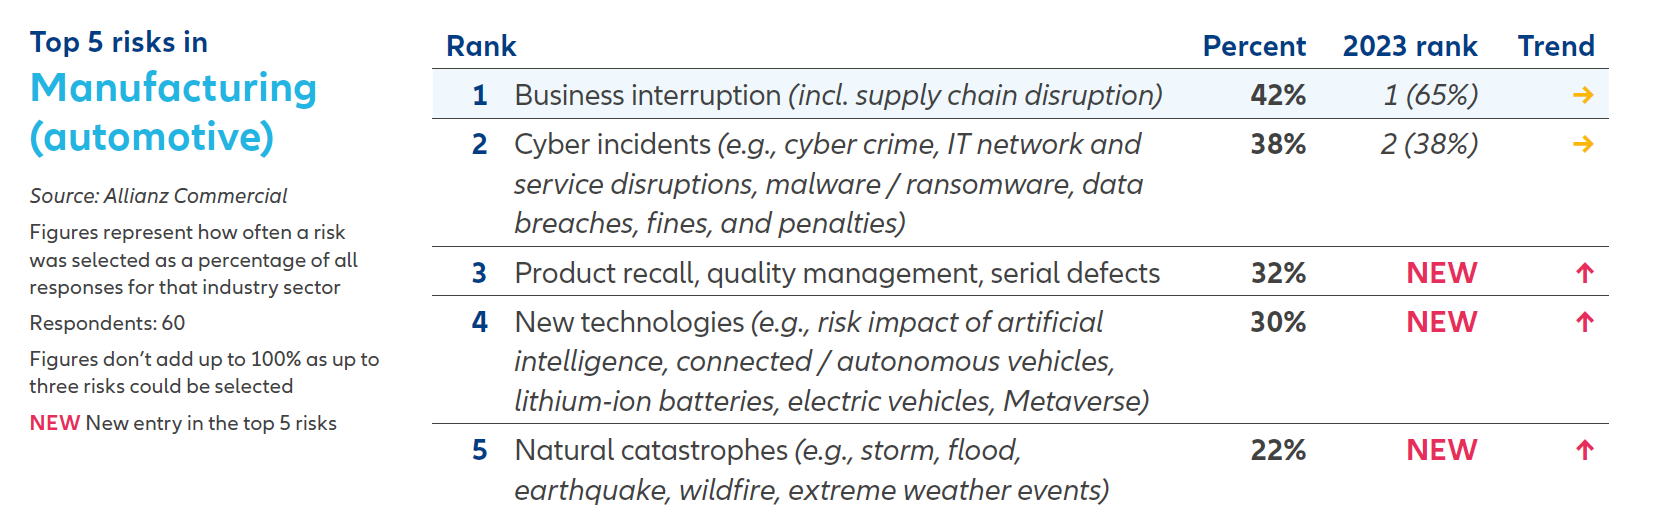 Top_five_risks_in_automotive_manufacturing_2024.png